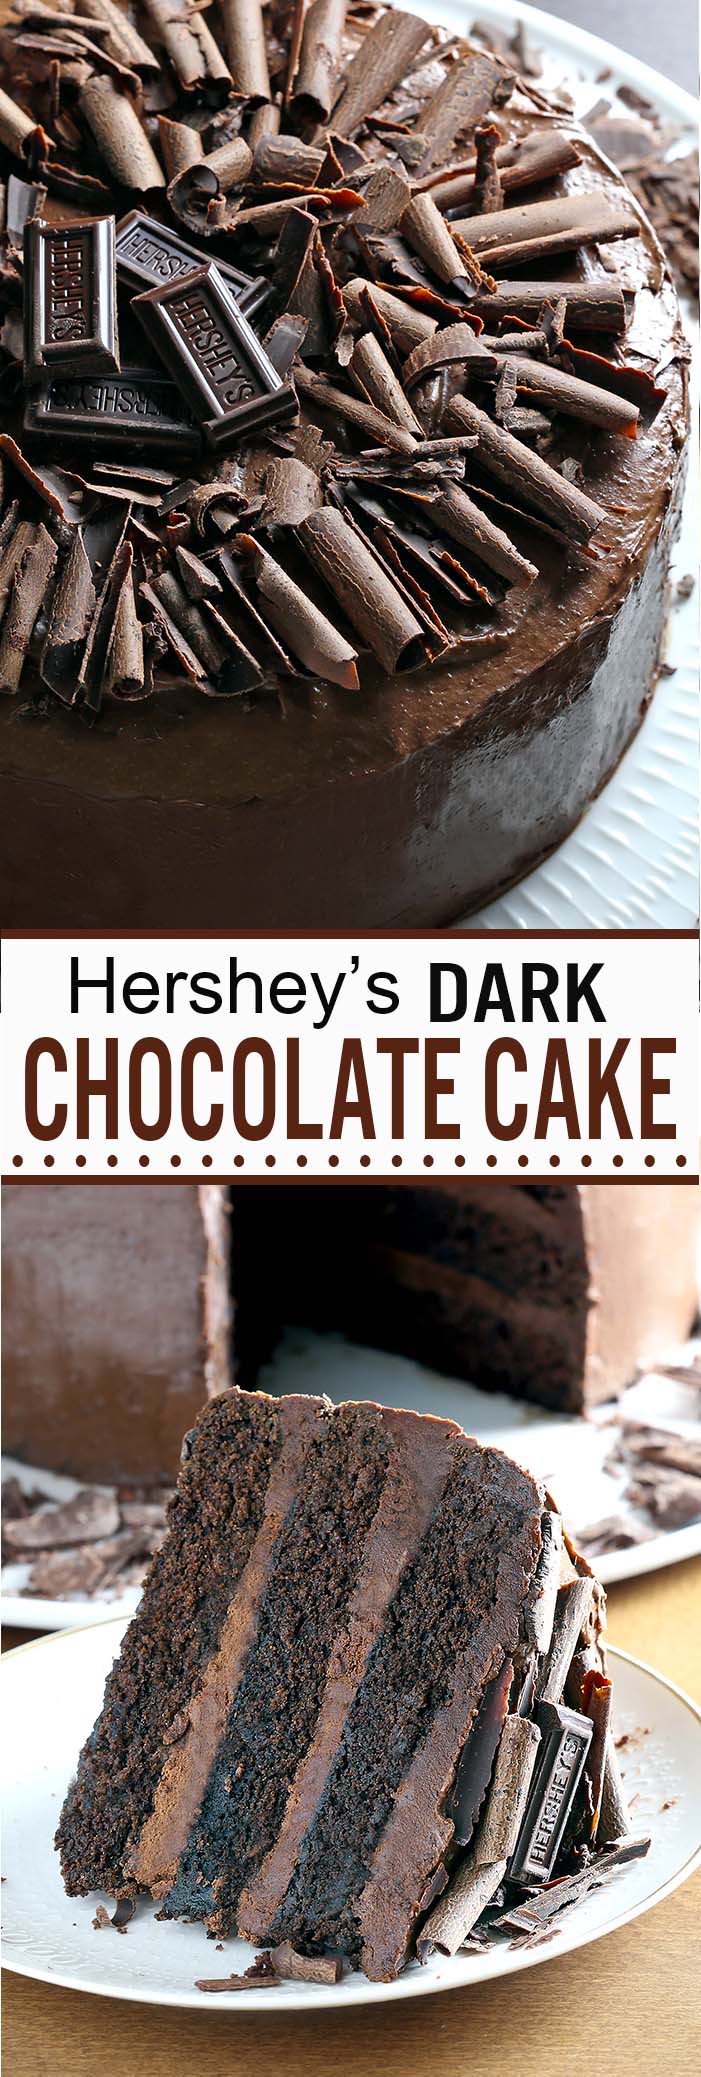 Moist, rich, chocolaty perfection, something that every chocolate fan should taste, this is one of those must-have recipes.